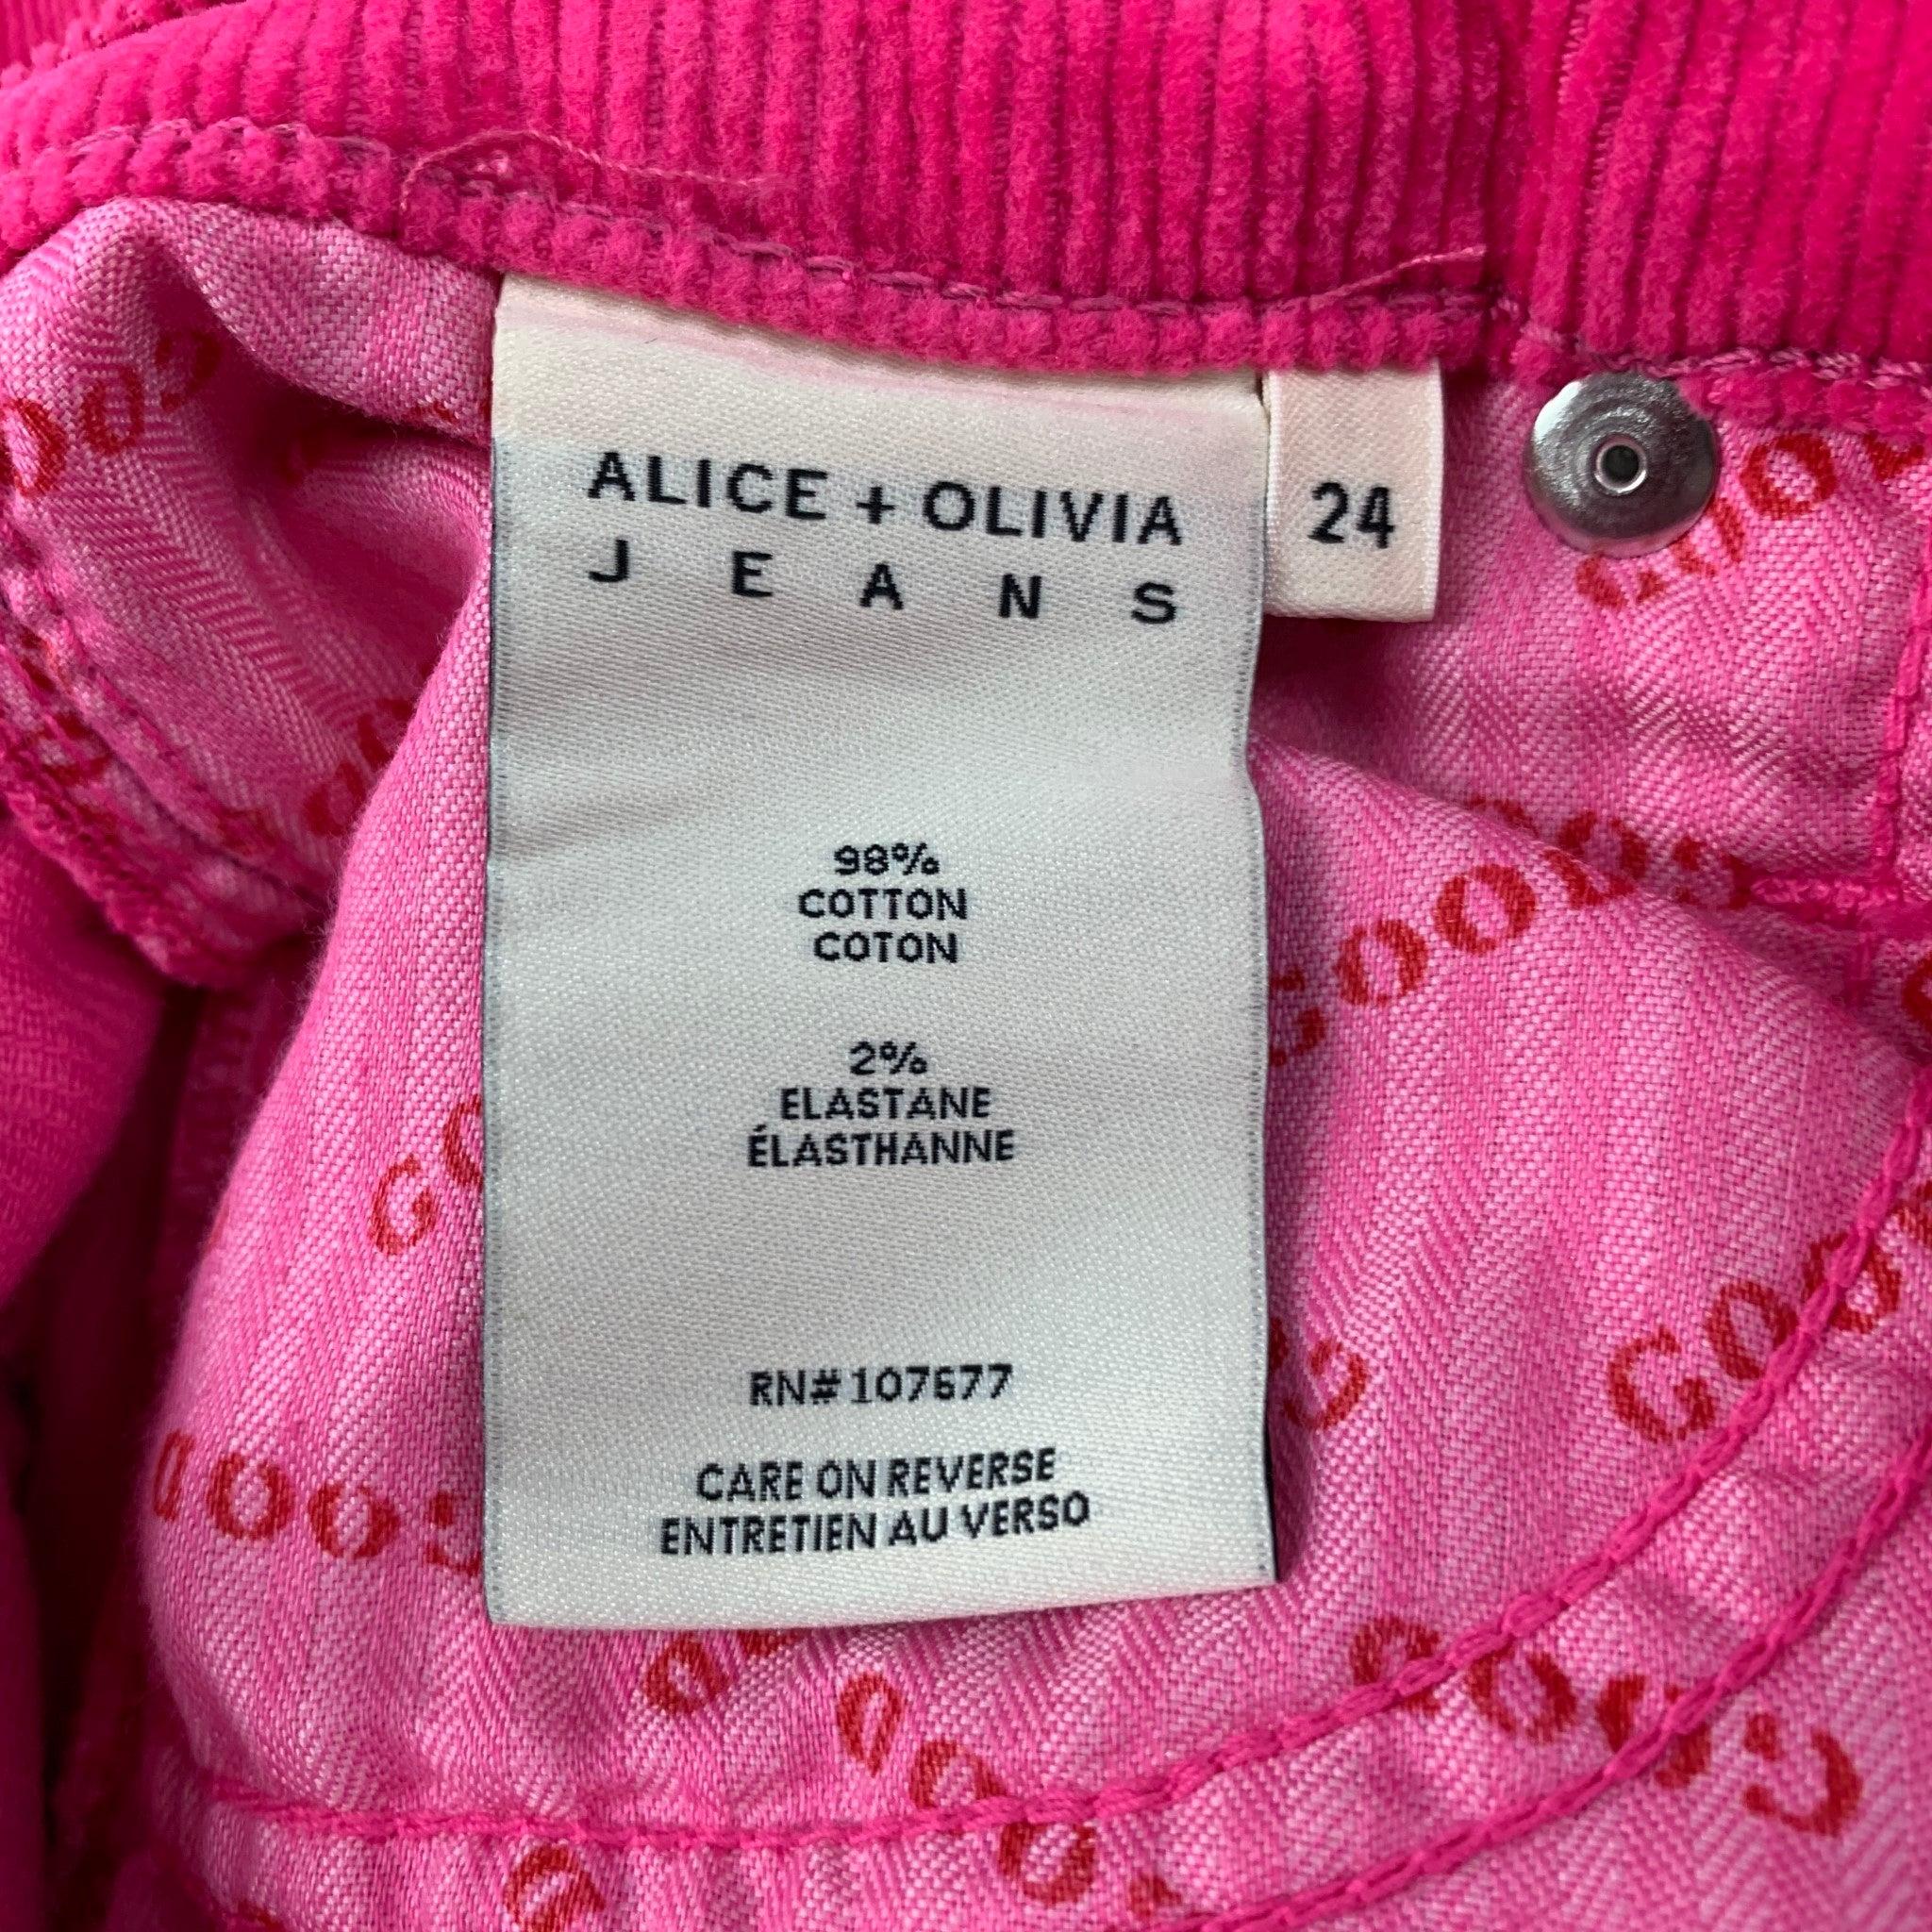 ALICE + OLIVIA Size 24 Pink Cotton Corduroy Jean Cut Pants In Good Condition For Sale In San Francisco, CA